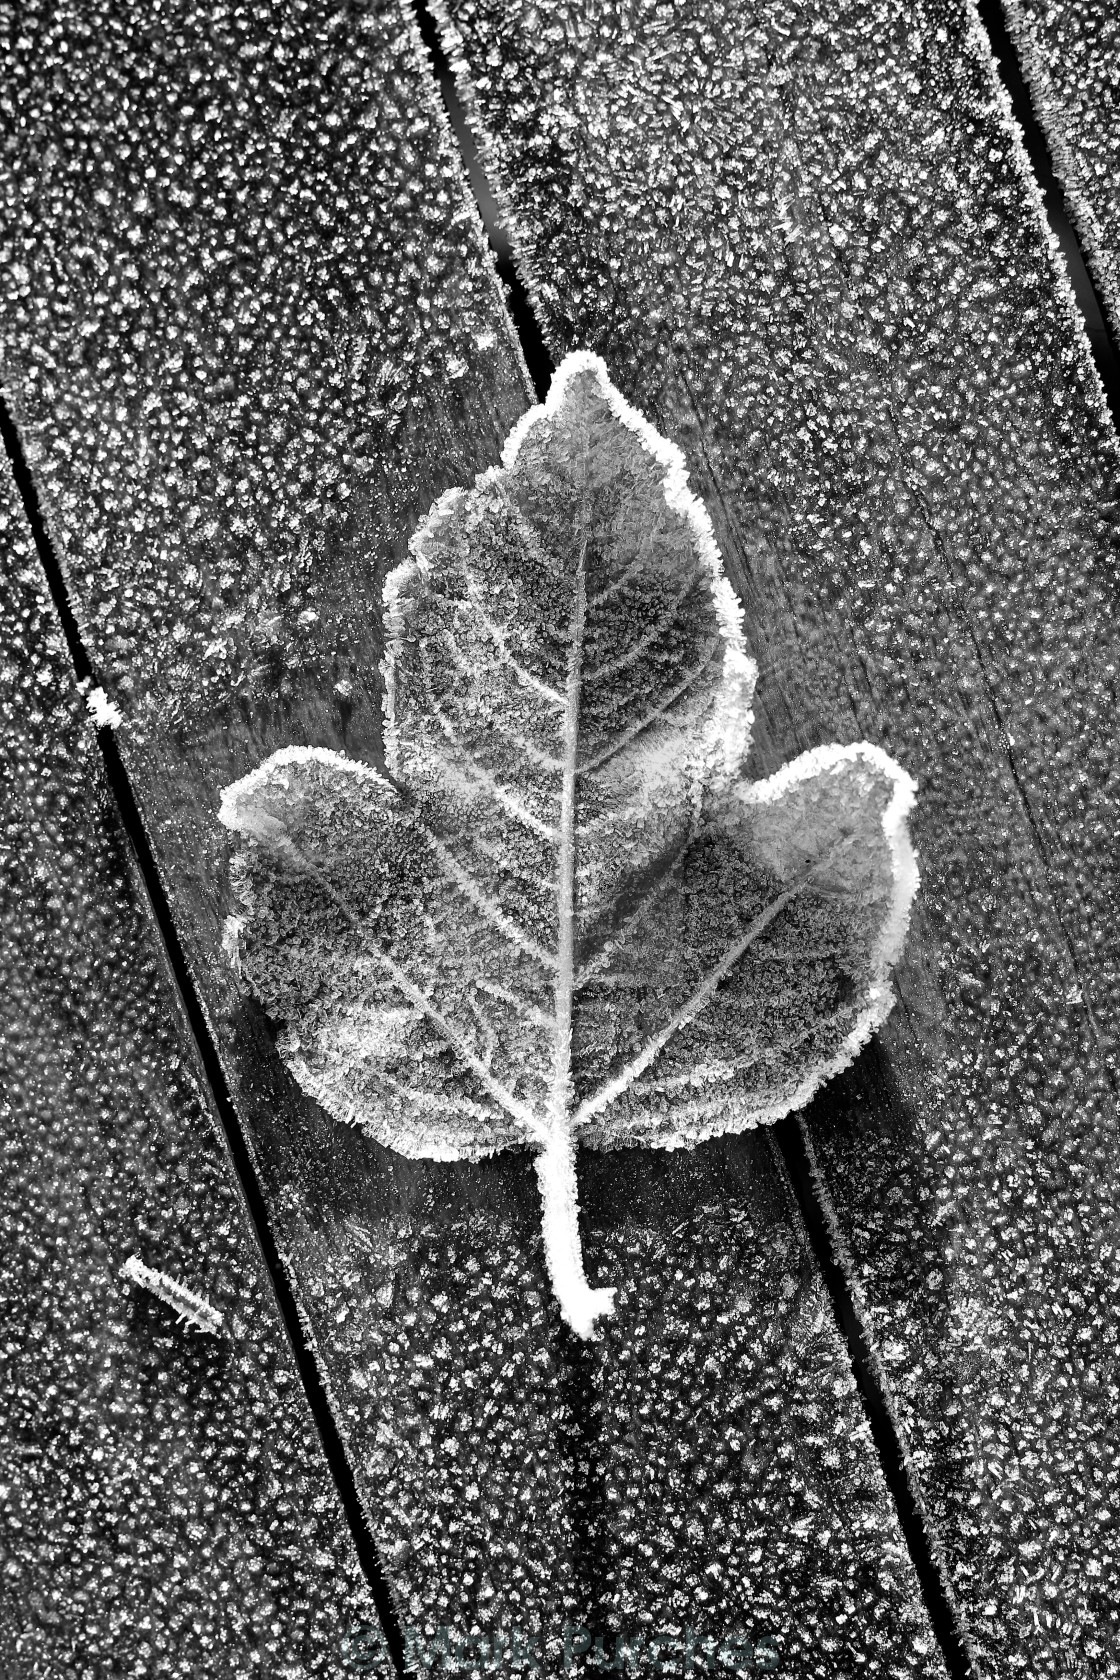 "Black White Single Frosty Leaf on Wooden Table" stock image